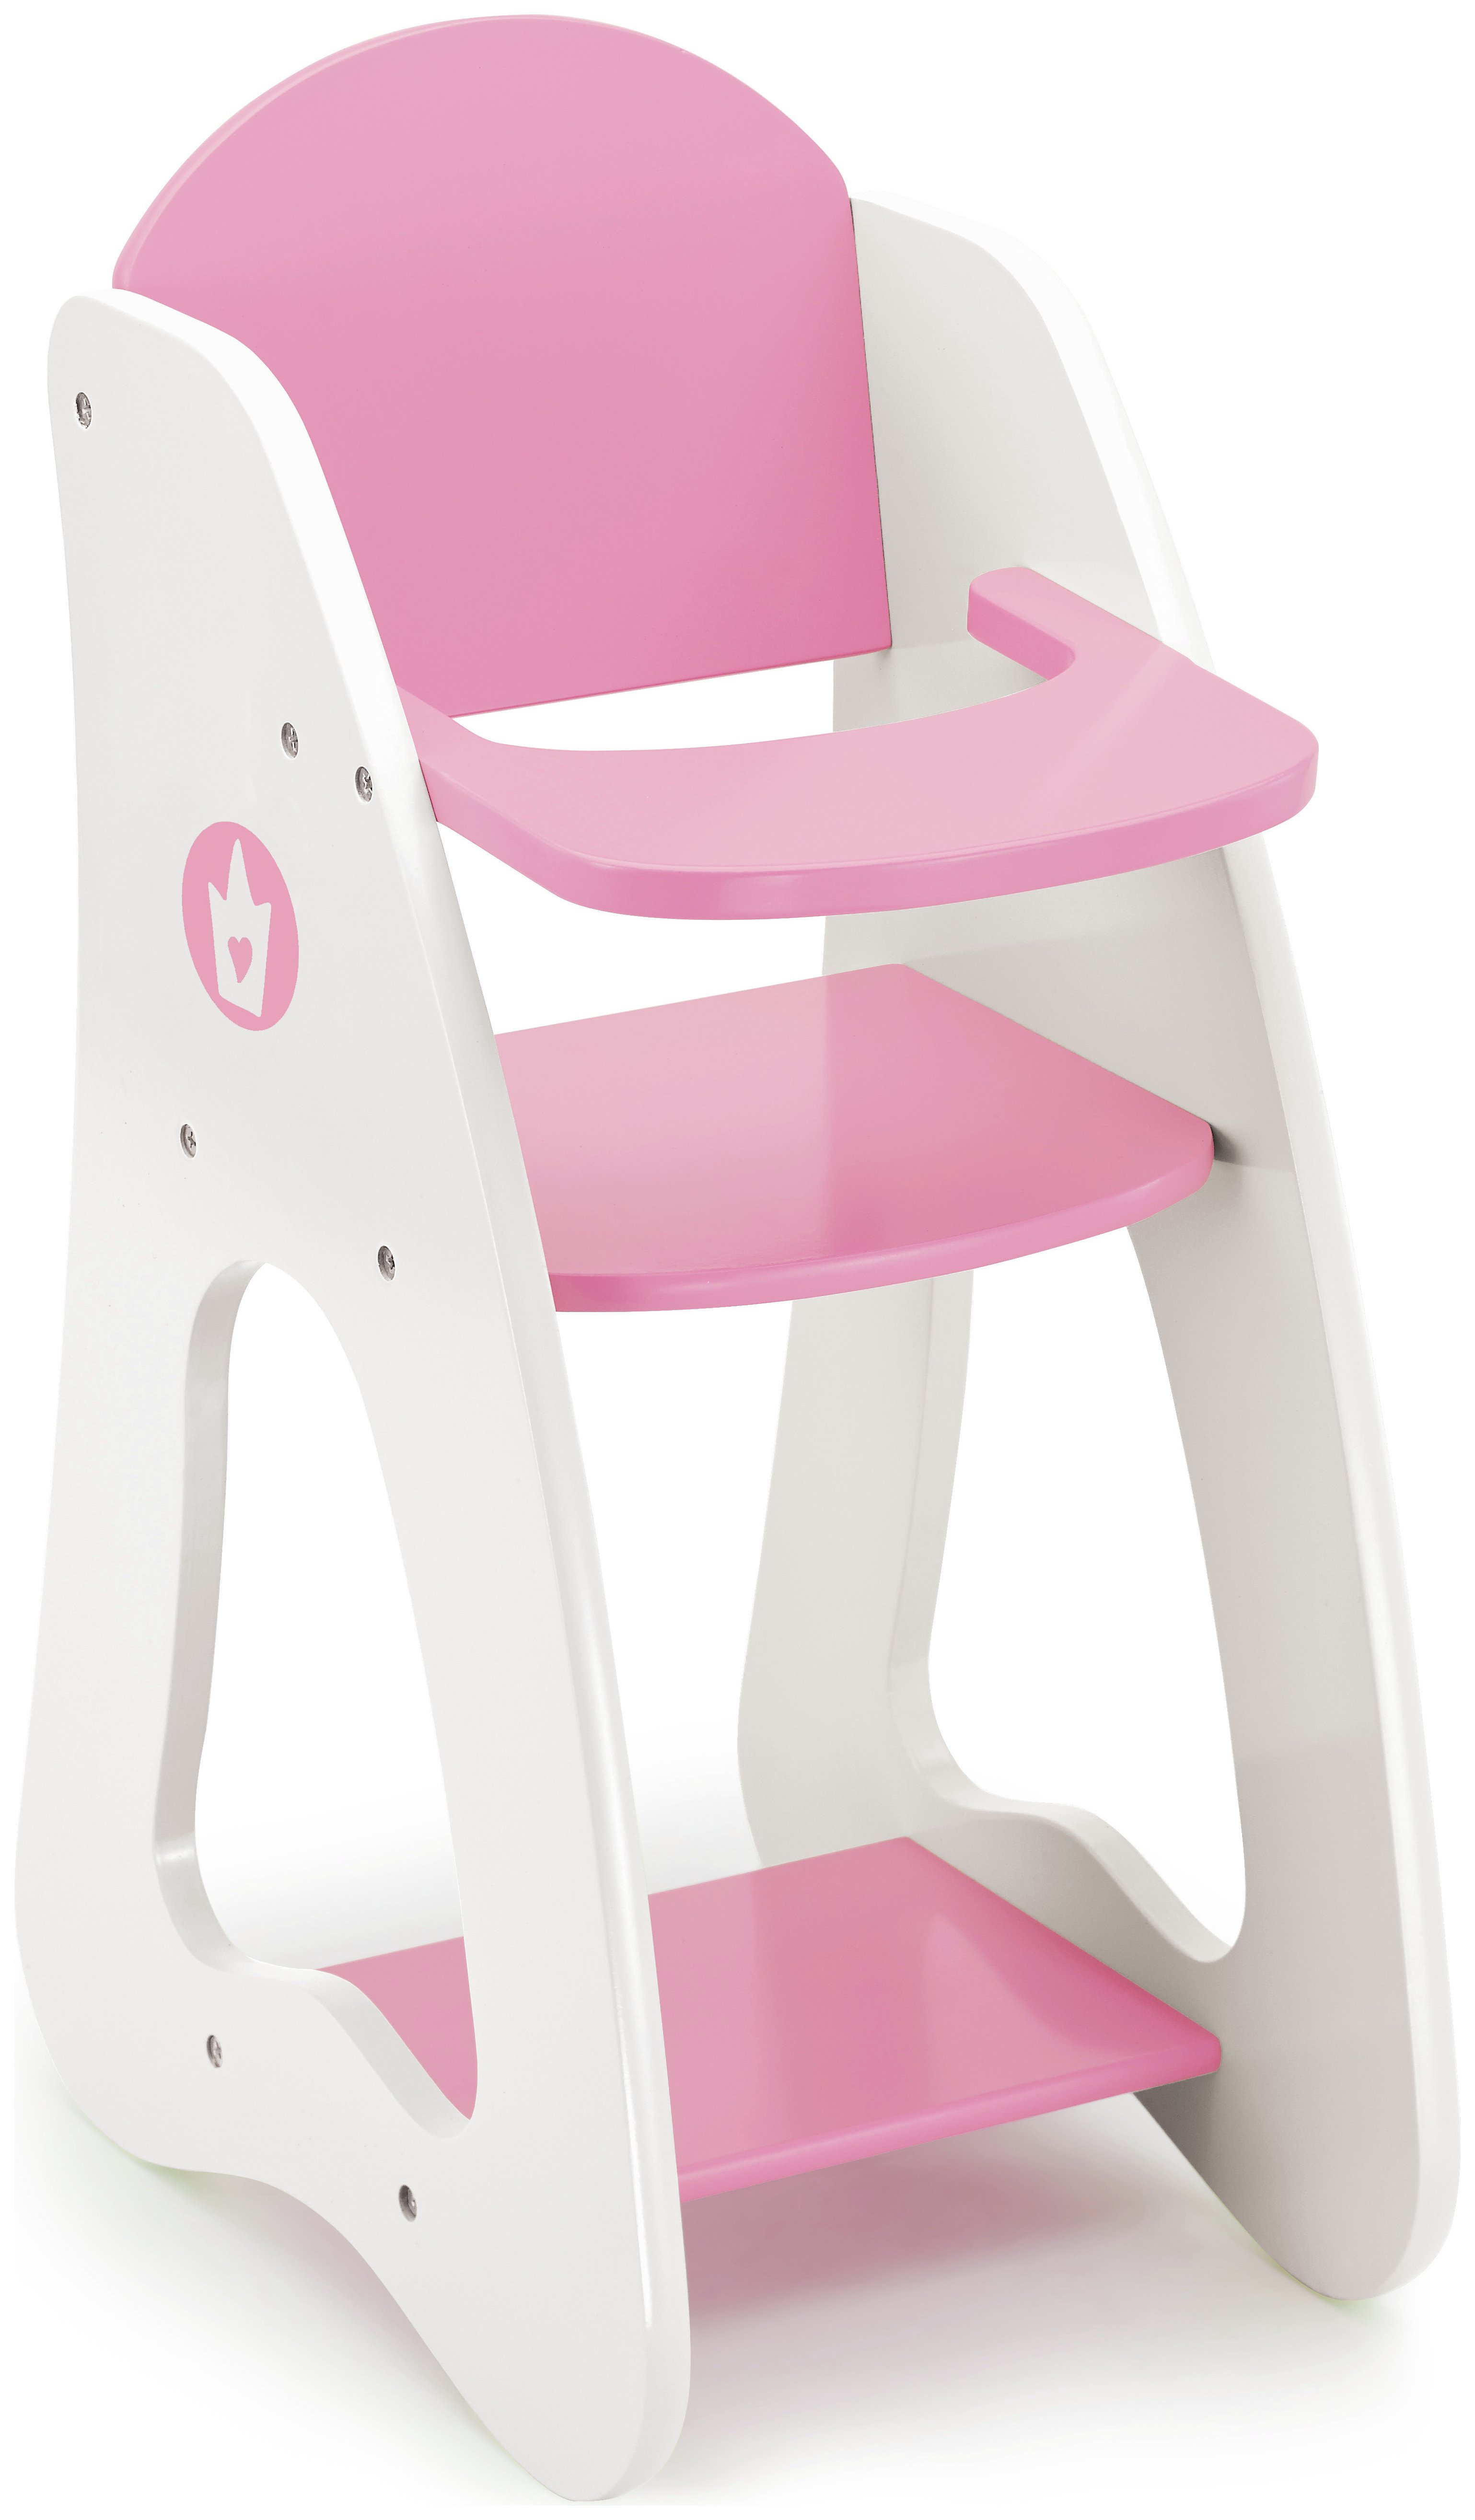 Bayer Doll's Highchair - Pink and White